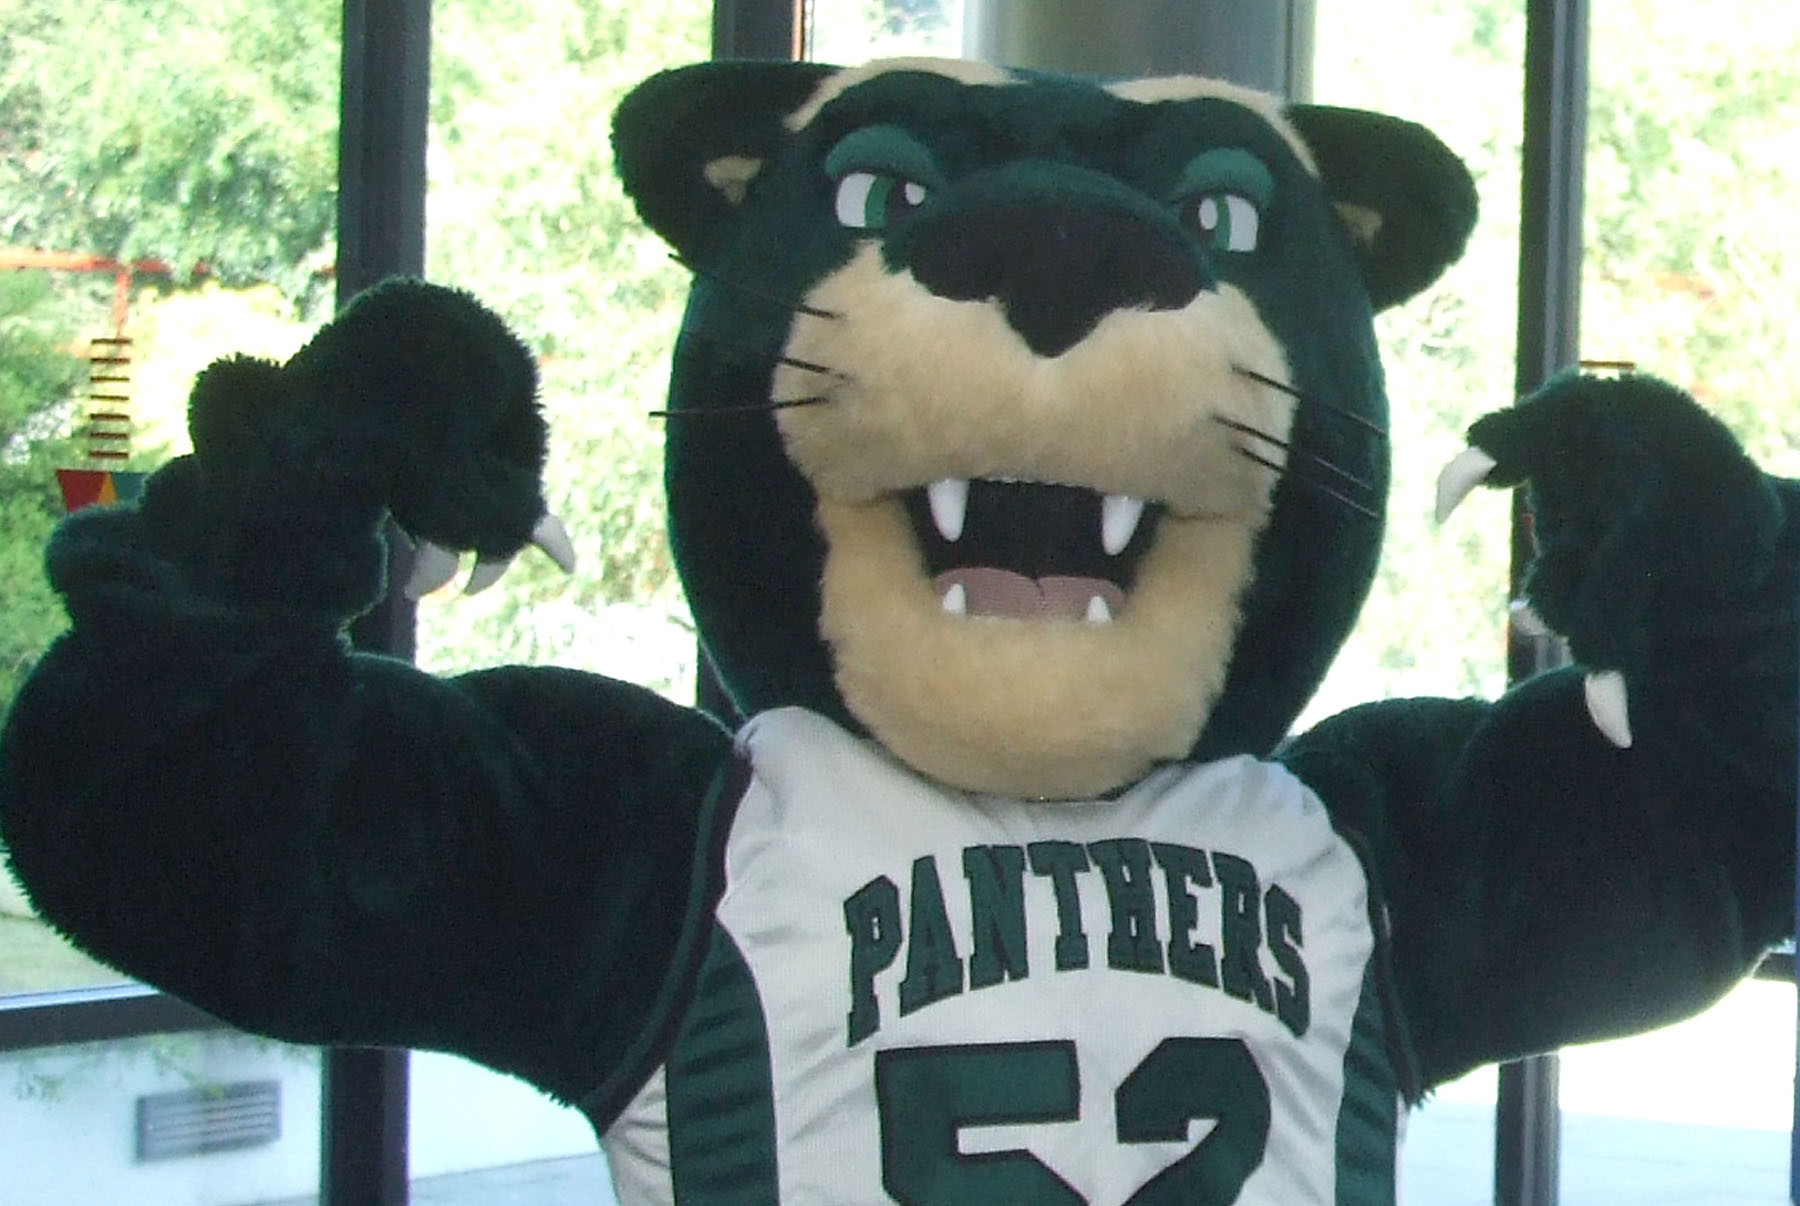 SUNY Old Westbury - OWWIN the Panther